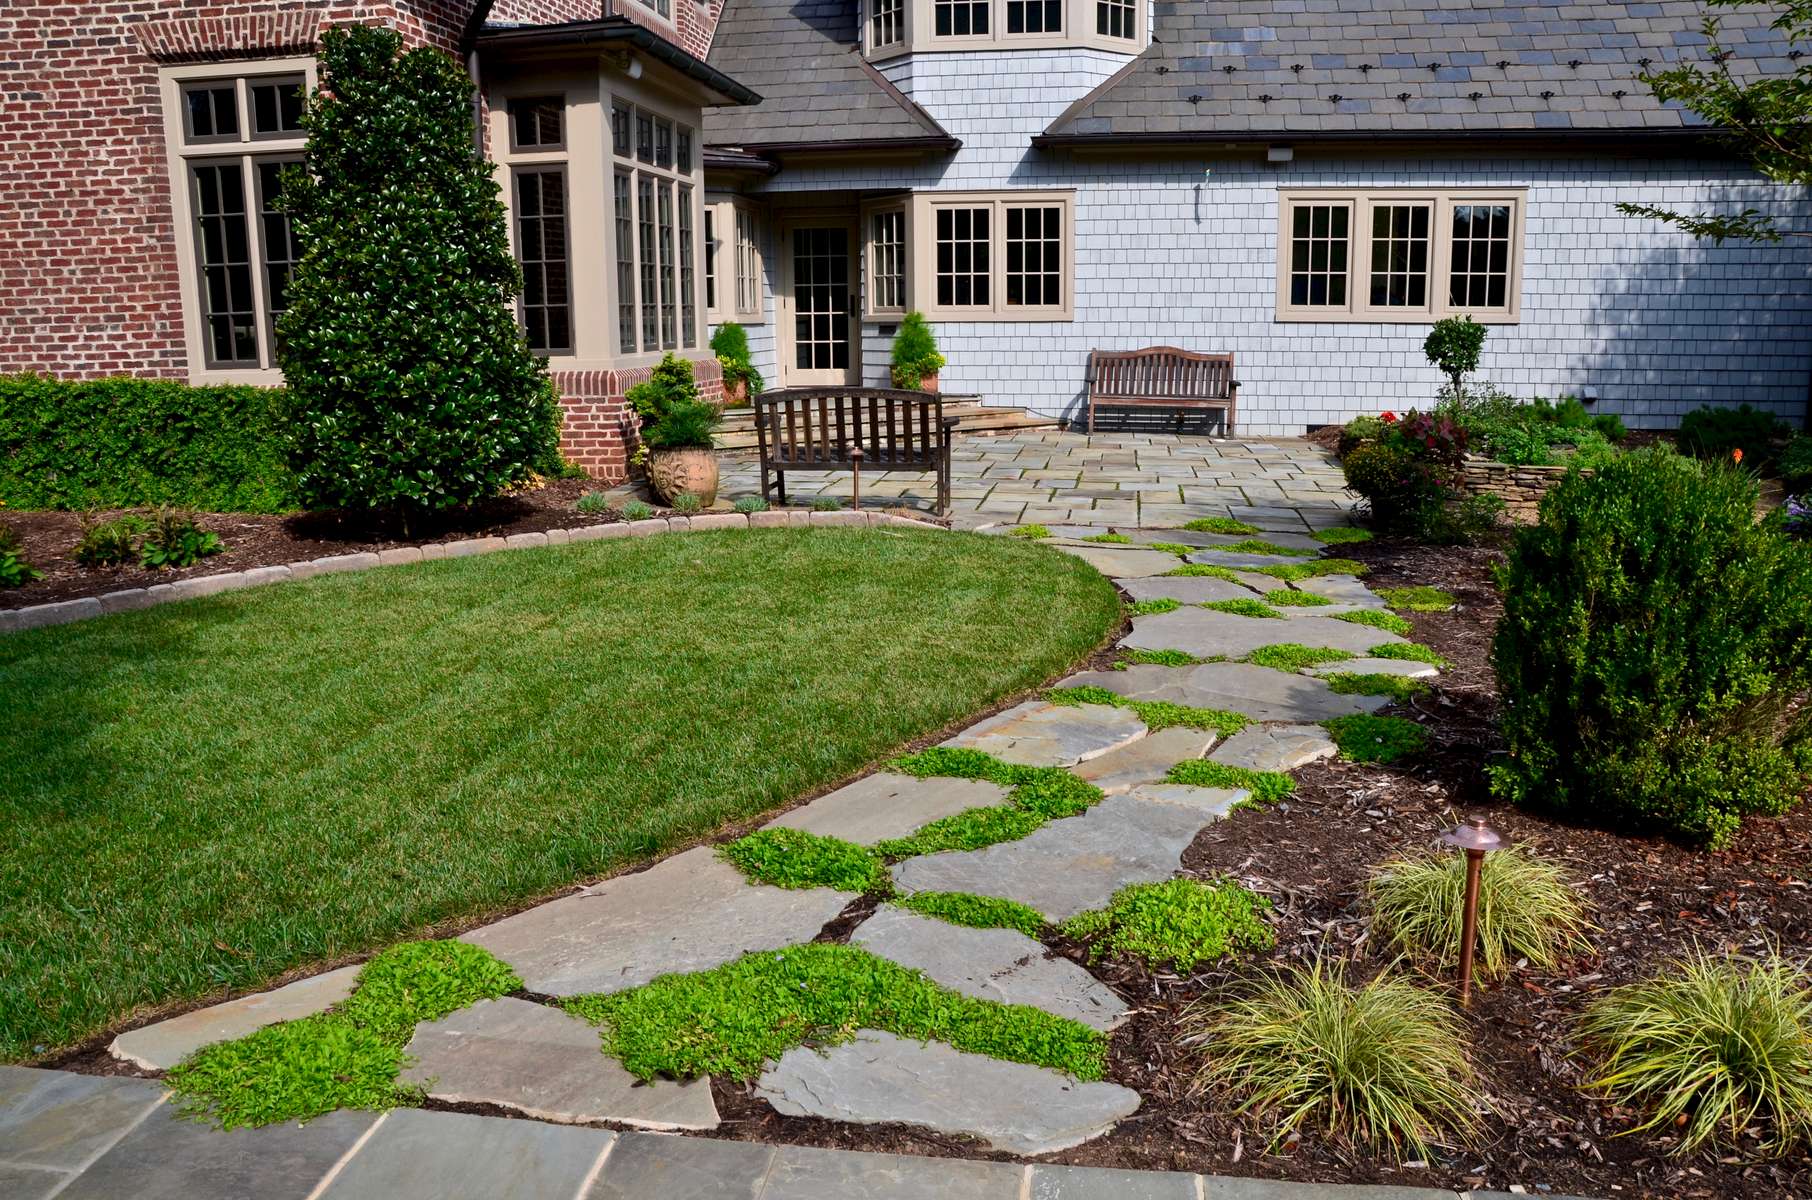 Enter friends & family; this tranquil meanering stepping stone path leads to the kitchen (side) entry of the residence. Culinary exploration is encouraged with the family's private herb garden located just steps away out the kitchen door...